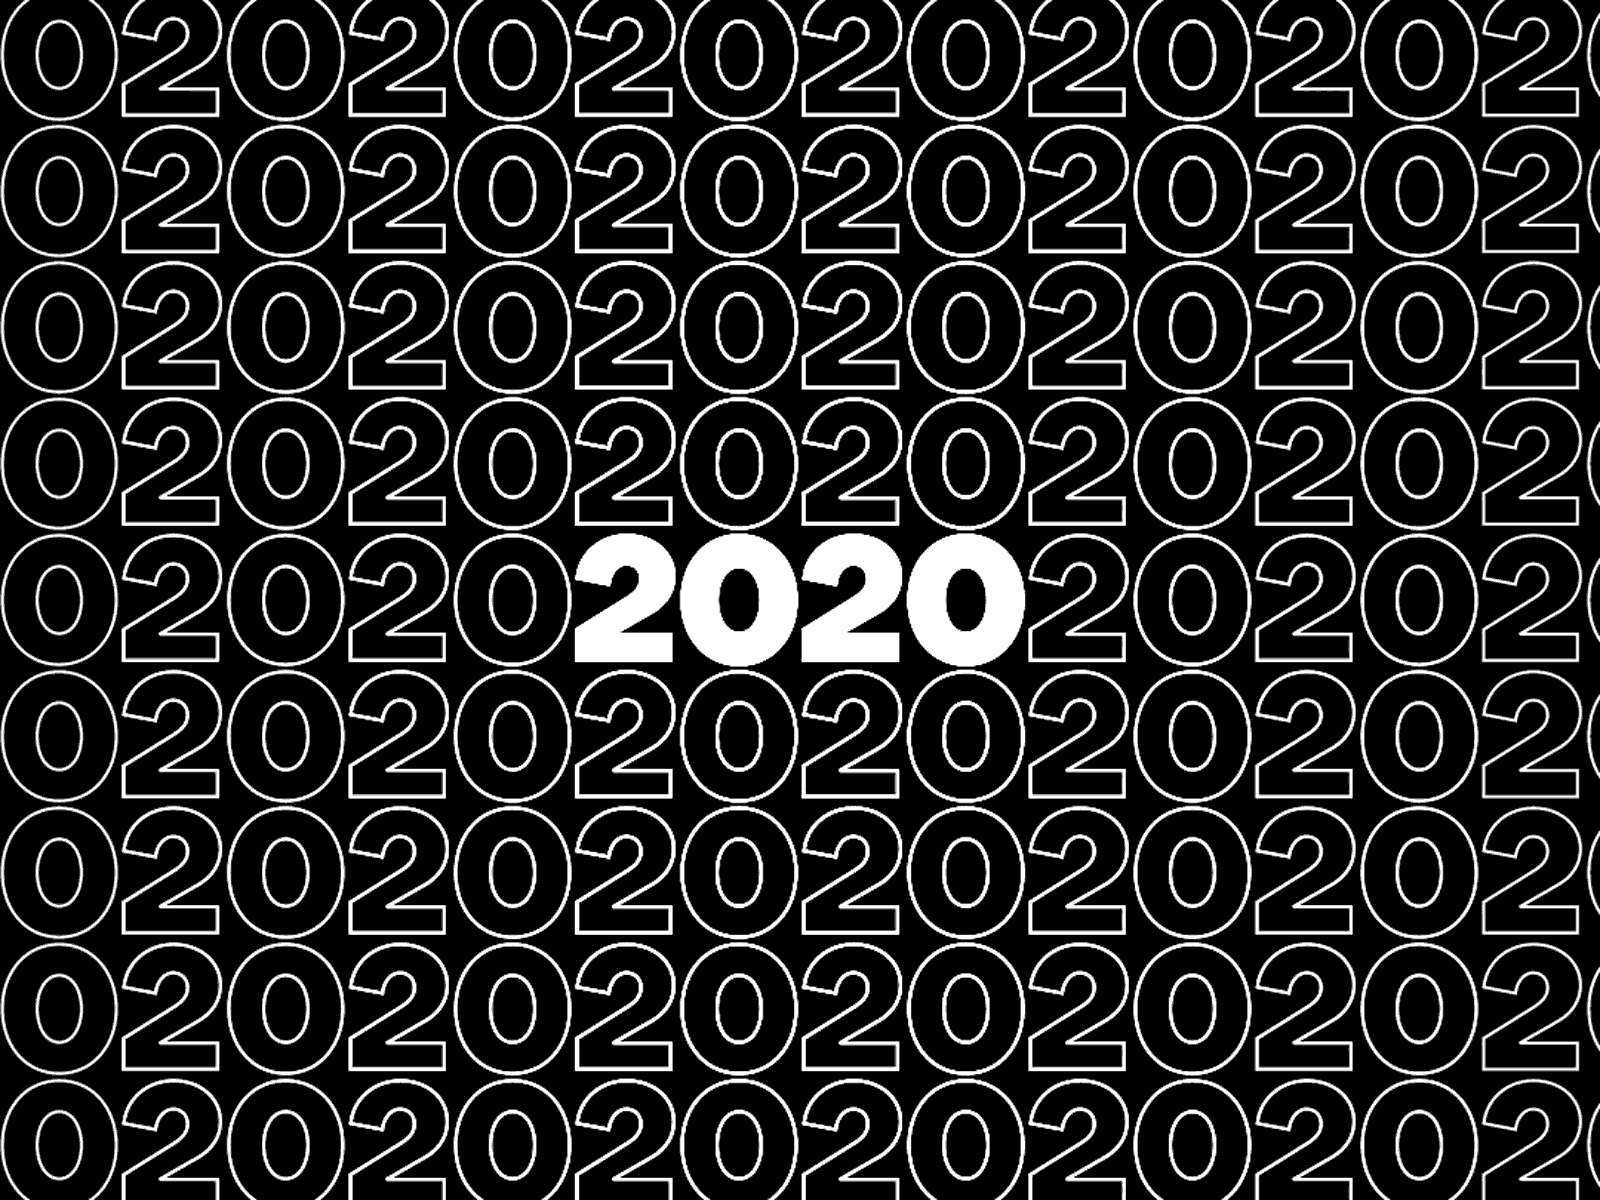 2020 2020 after effect french graphicdesign happy new year motion design typography